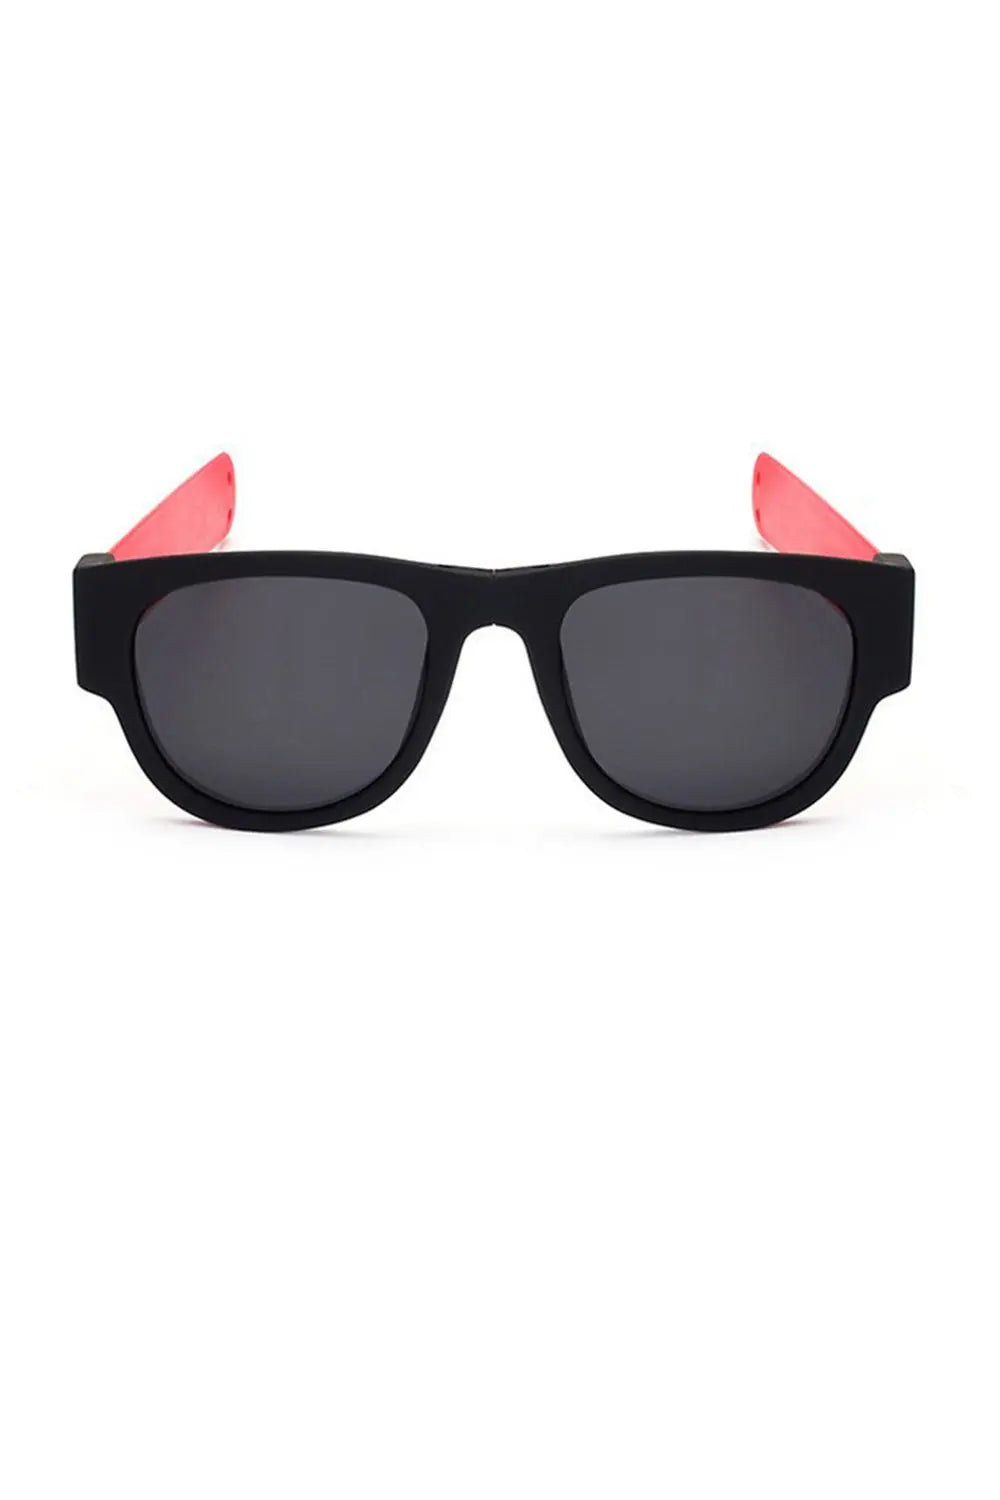 Foldable Sports Sunglasses - Red - Strange Clothes